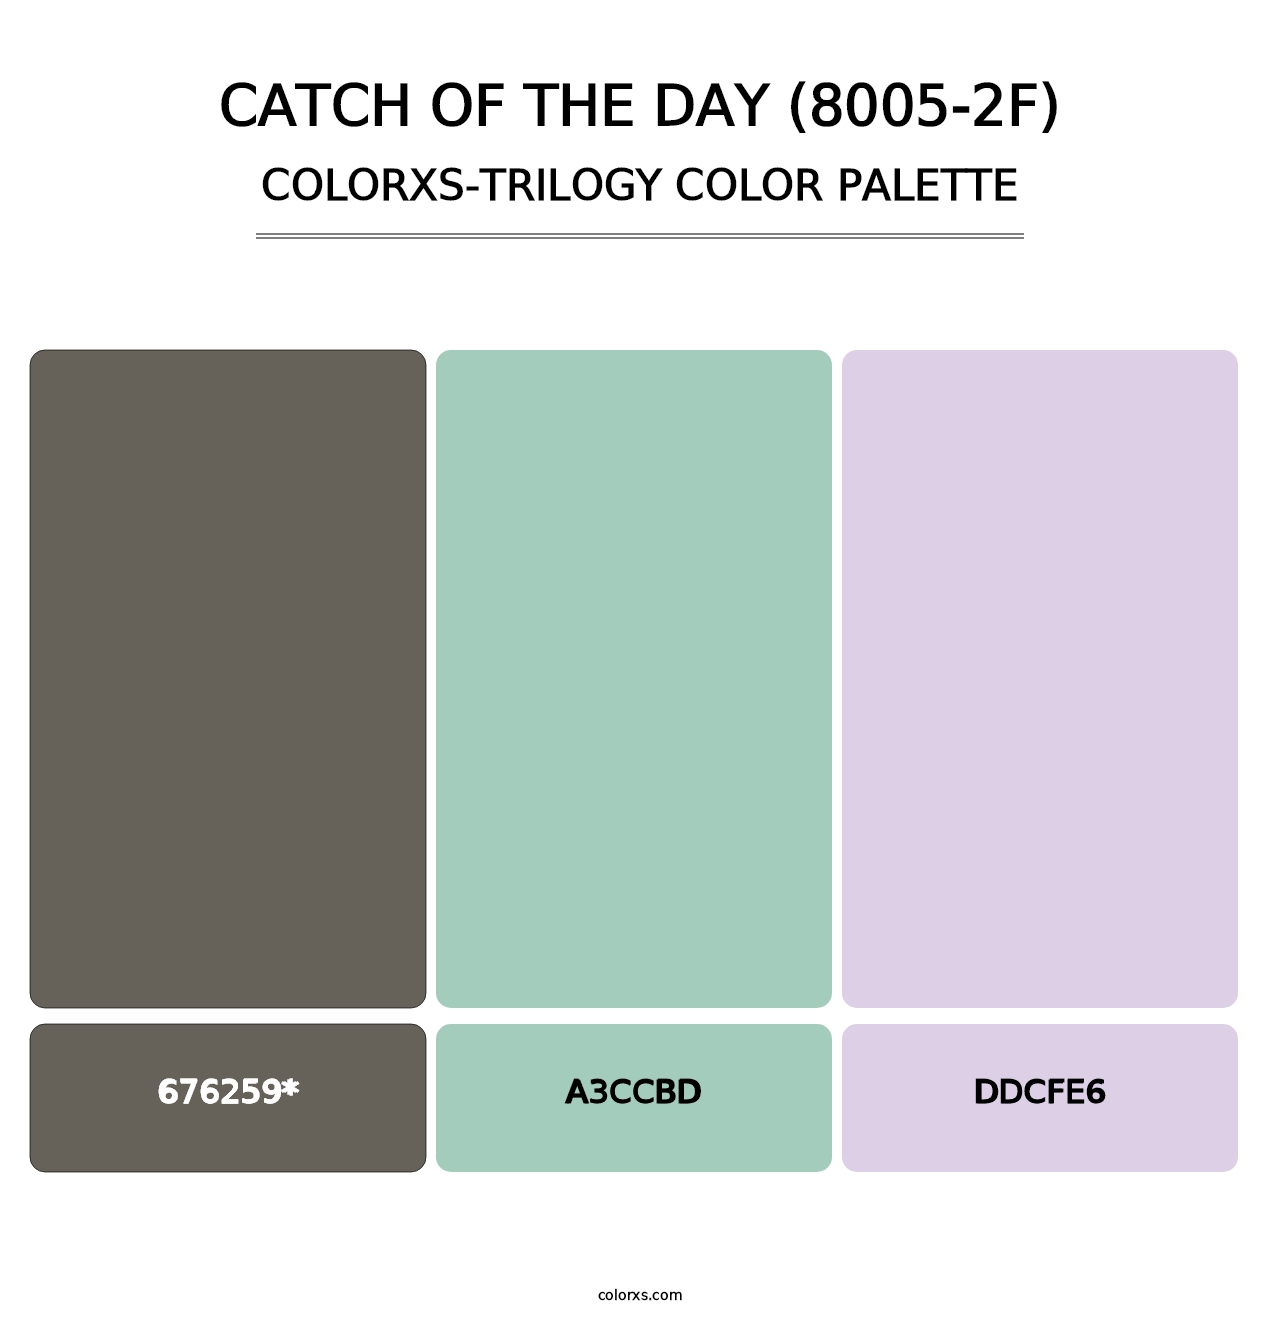 Catch of the Day (8005-2F) - Colorxs Trilogy Palette